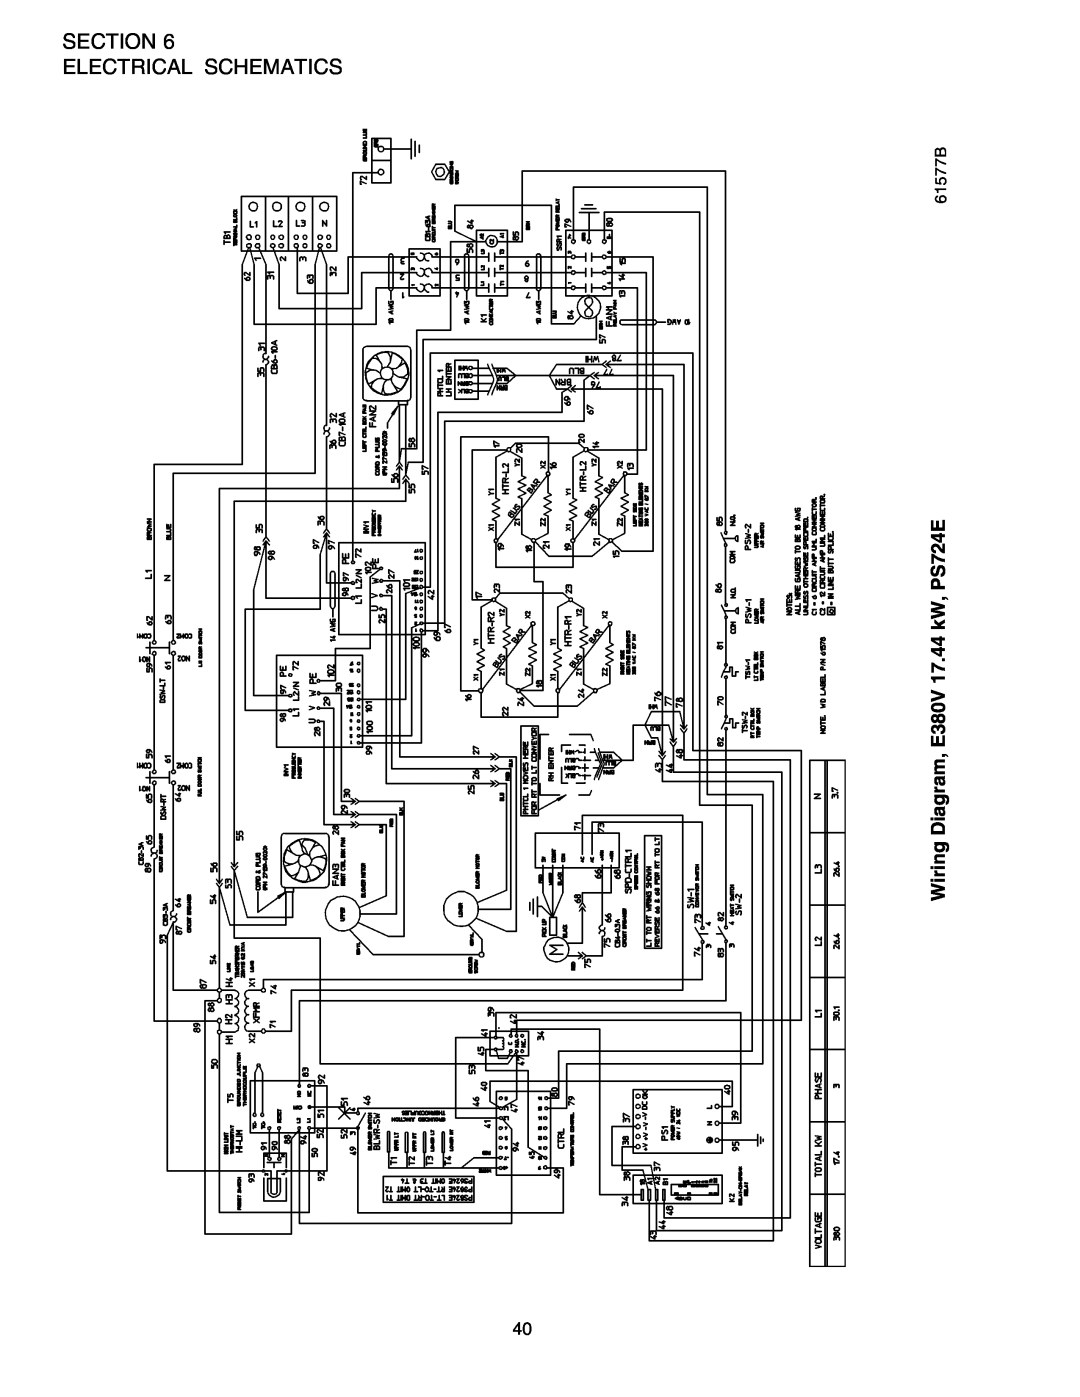 Middleby Marshall installation manual Section Electrical Schematics, Wiring Diagram, E380V 17.44 kW, PS724E, 61577B 